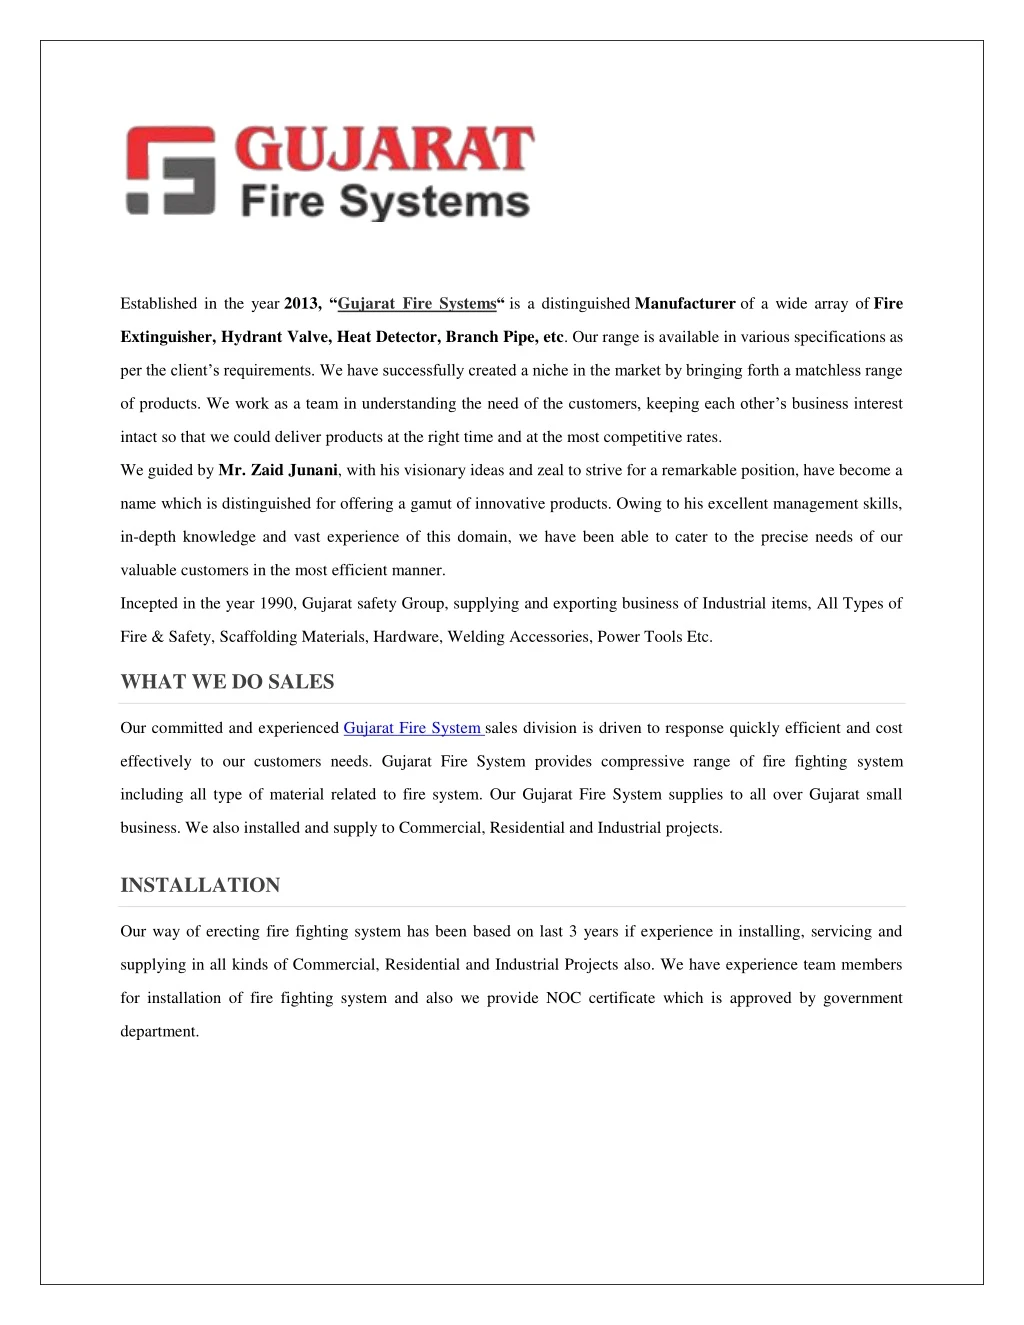 established in the year 2013 gujarat fire systems